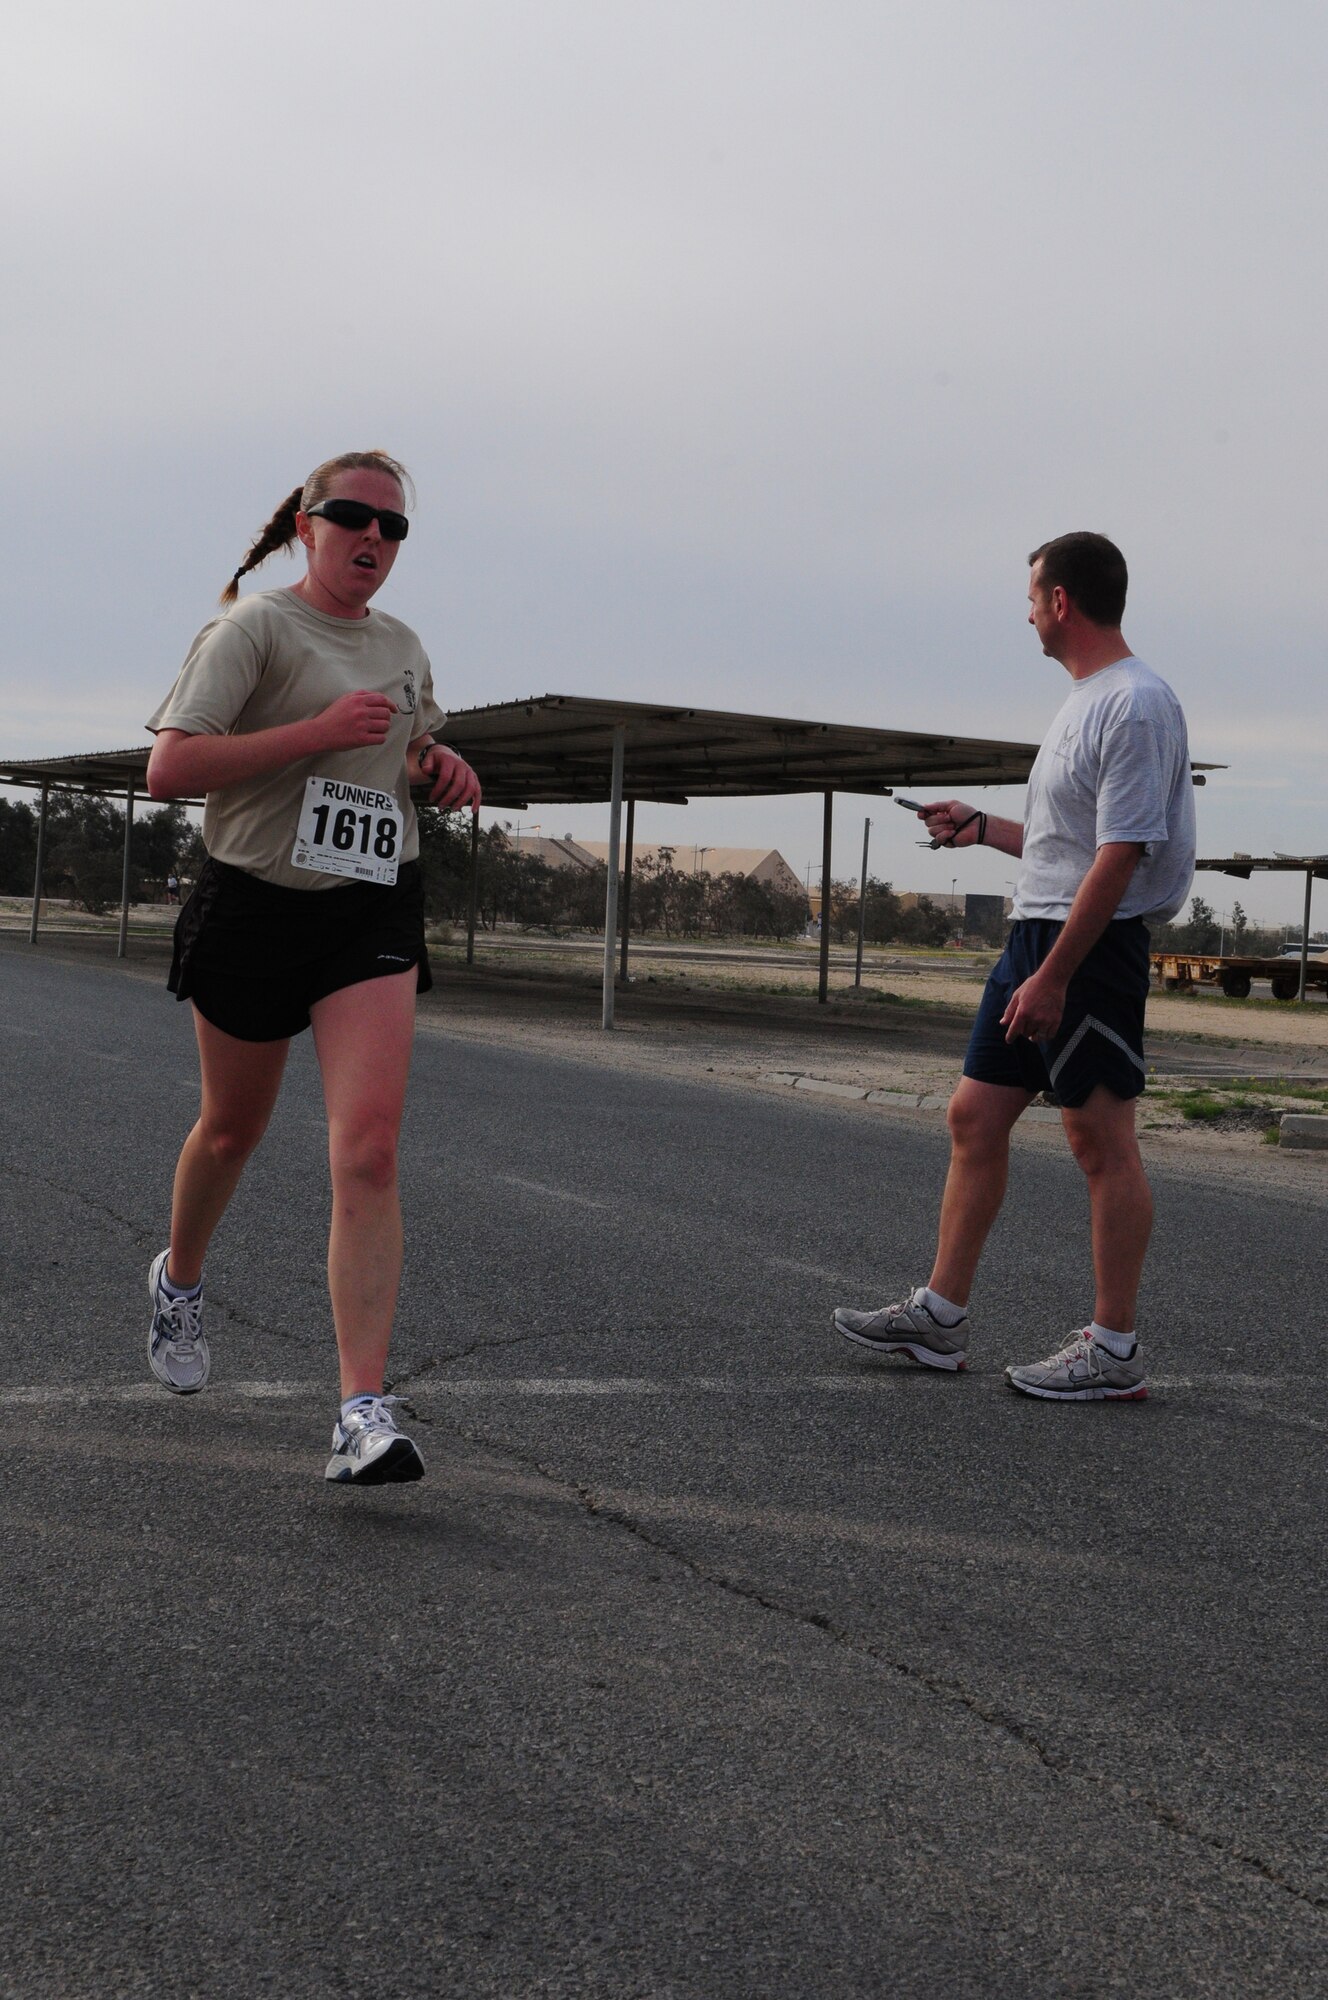 Australian Cpl. Cath Deeks, crosses the 10-kilometer finish line Jan. 18, 2010 during the Armed Forces MLK Run at an air base in Southwest Asia. Corporal Deeks placed first in the women's category with a time of 49:58. About 150 servicemembers, Department of Defense civilian and contract personnel and coalition partners participated in the 10- and 5-kilometer race honoring Martin Luther King Jr. The event was sponsored by HFP Racing. (U.S. Air Force photo by Staff Sgt. Robert Sizelove/Released)